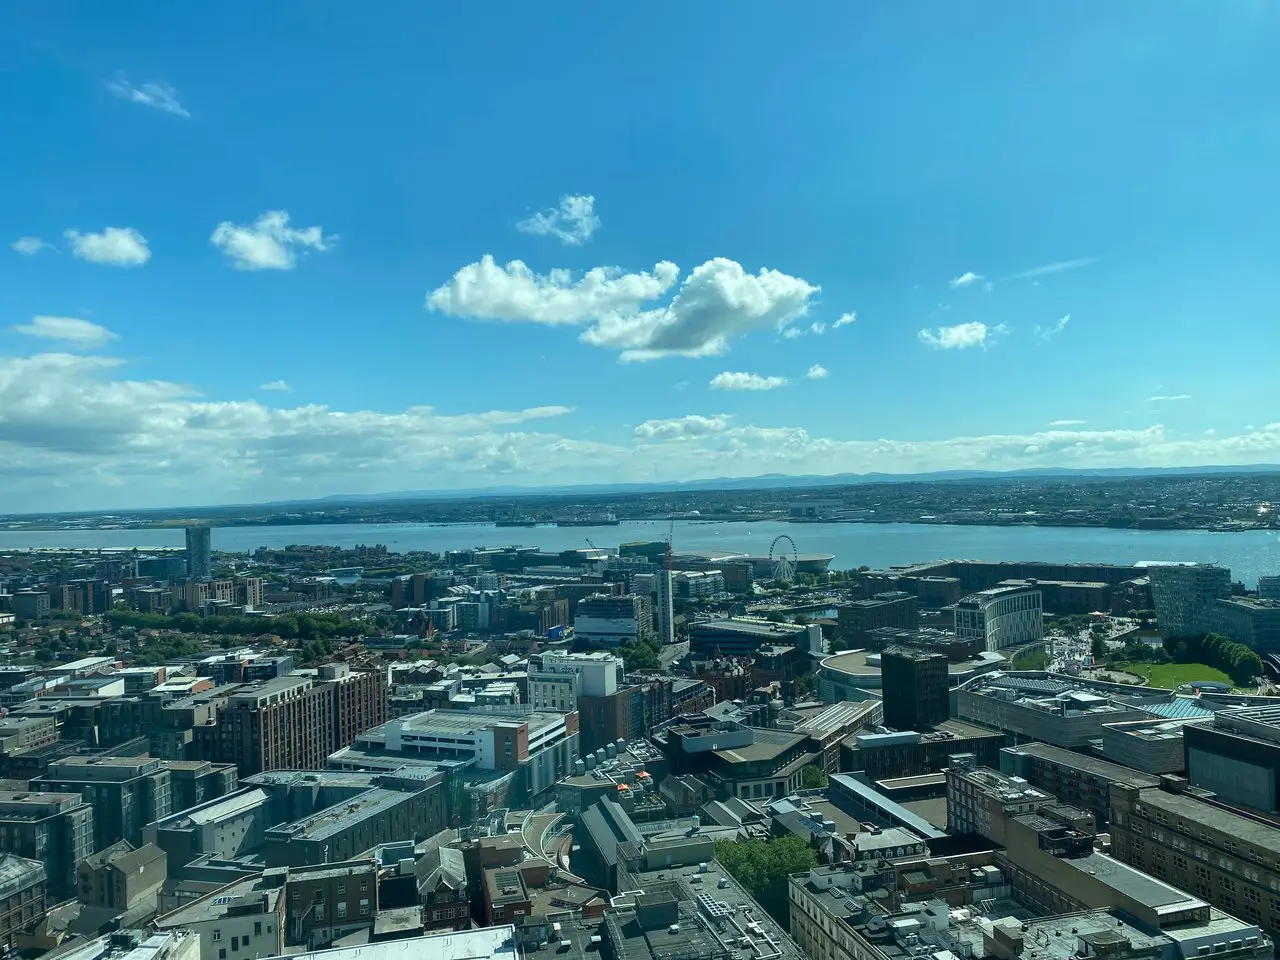 Aerial view of Liverpool showing famous landmarks like the River Mersey